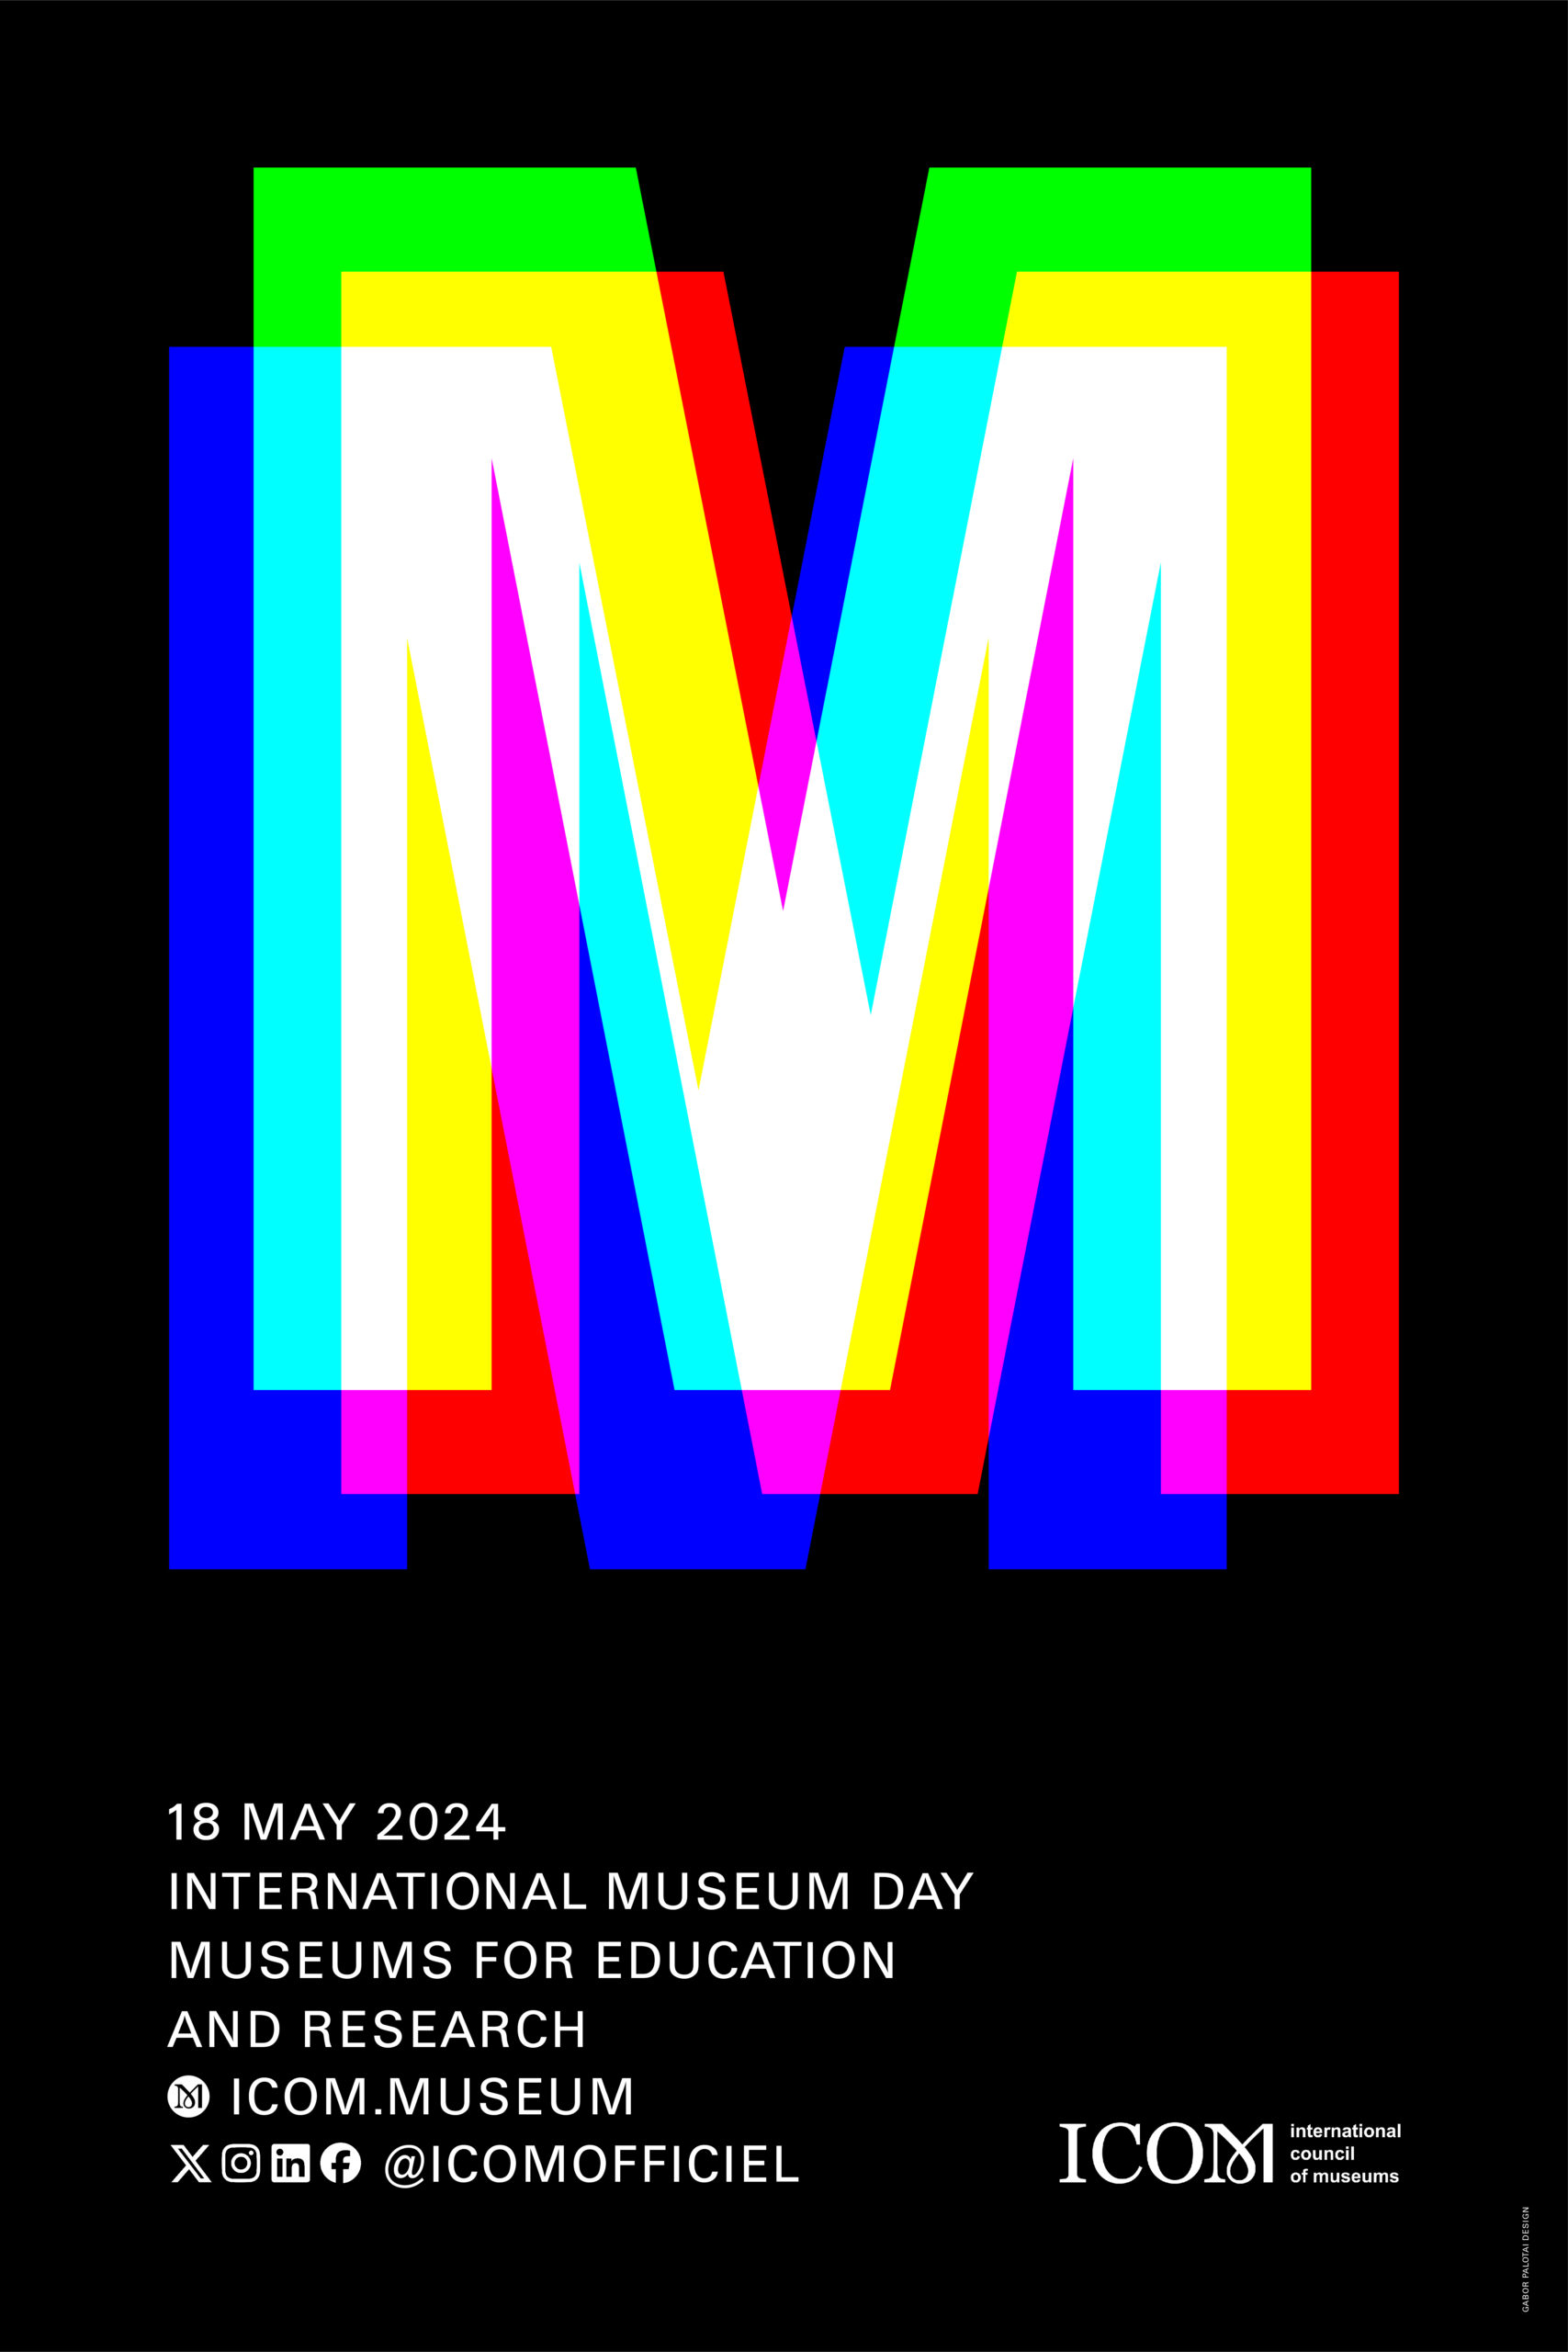 ICOM International Museum Day 2024: Museums for Education and Research